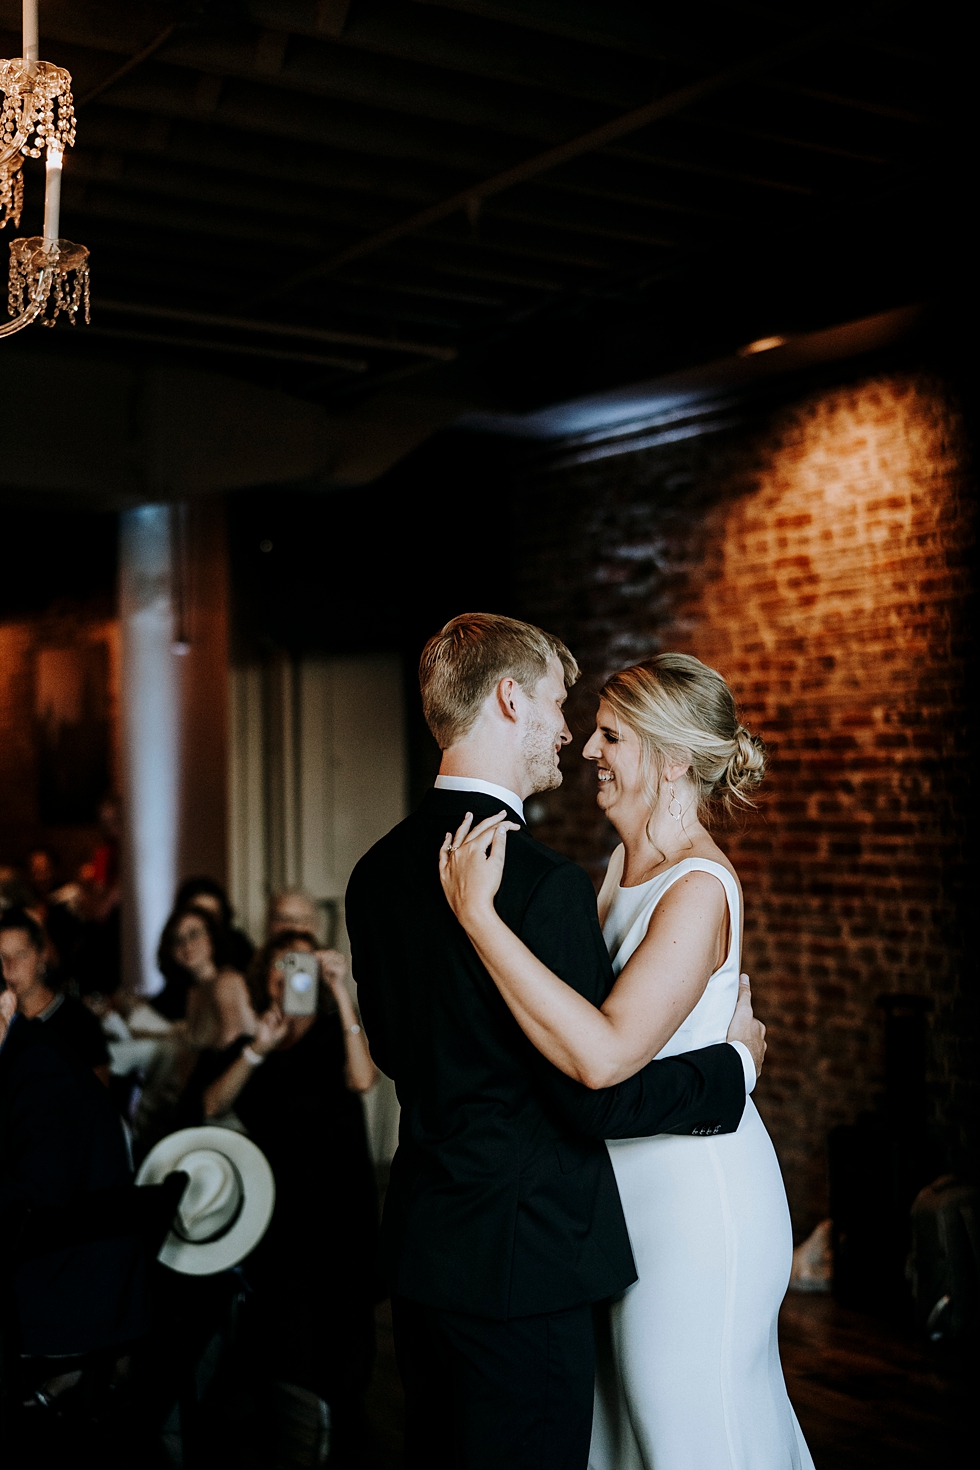  The bride and groom share their first dance as husband and wife #weddinggoals #weddingphotographer #married #ceremonyandreception #kentuckyphotographer #indianaphotographer #louisvillephotographer #weddingphotos #husbandandwife #rooftopceremony #dow